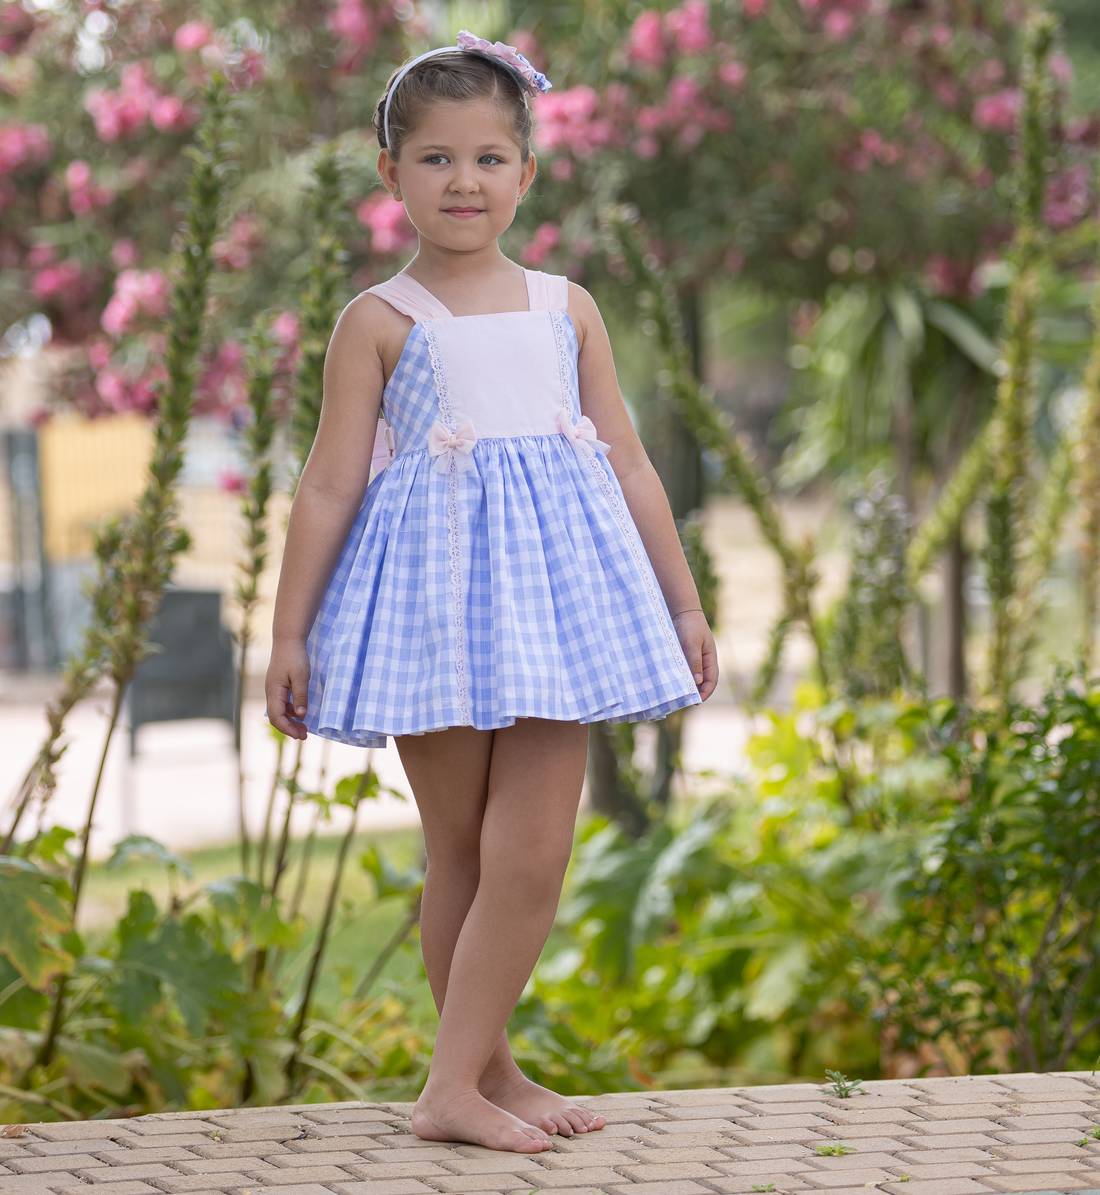 Five Fairytale Destinations for Dress-Up Adventures: Perfect for Your Little Girl!